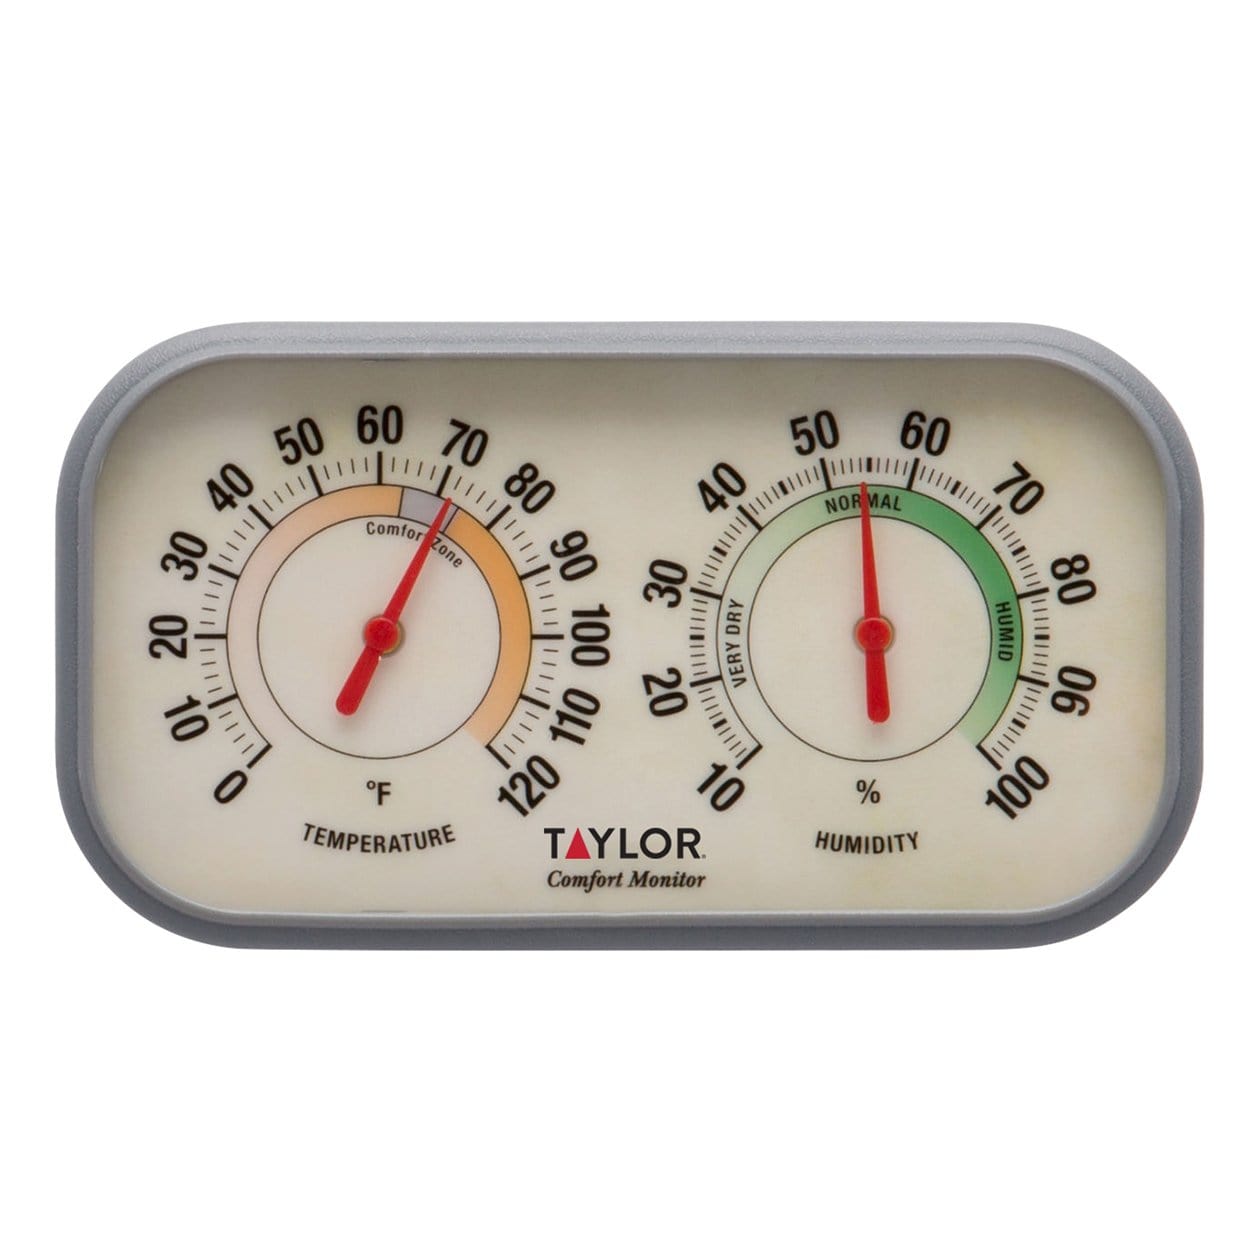 Taylor 5504 4 Indoor Thermometer and Hygrometer